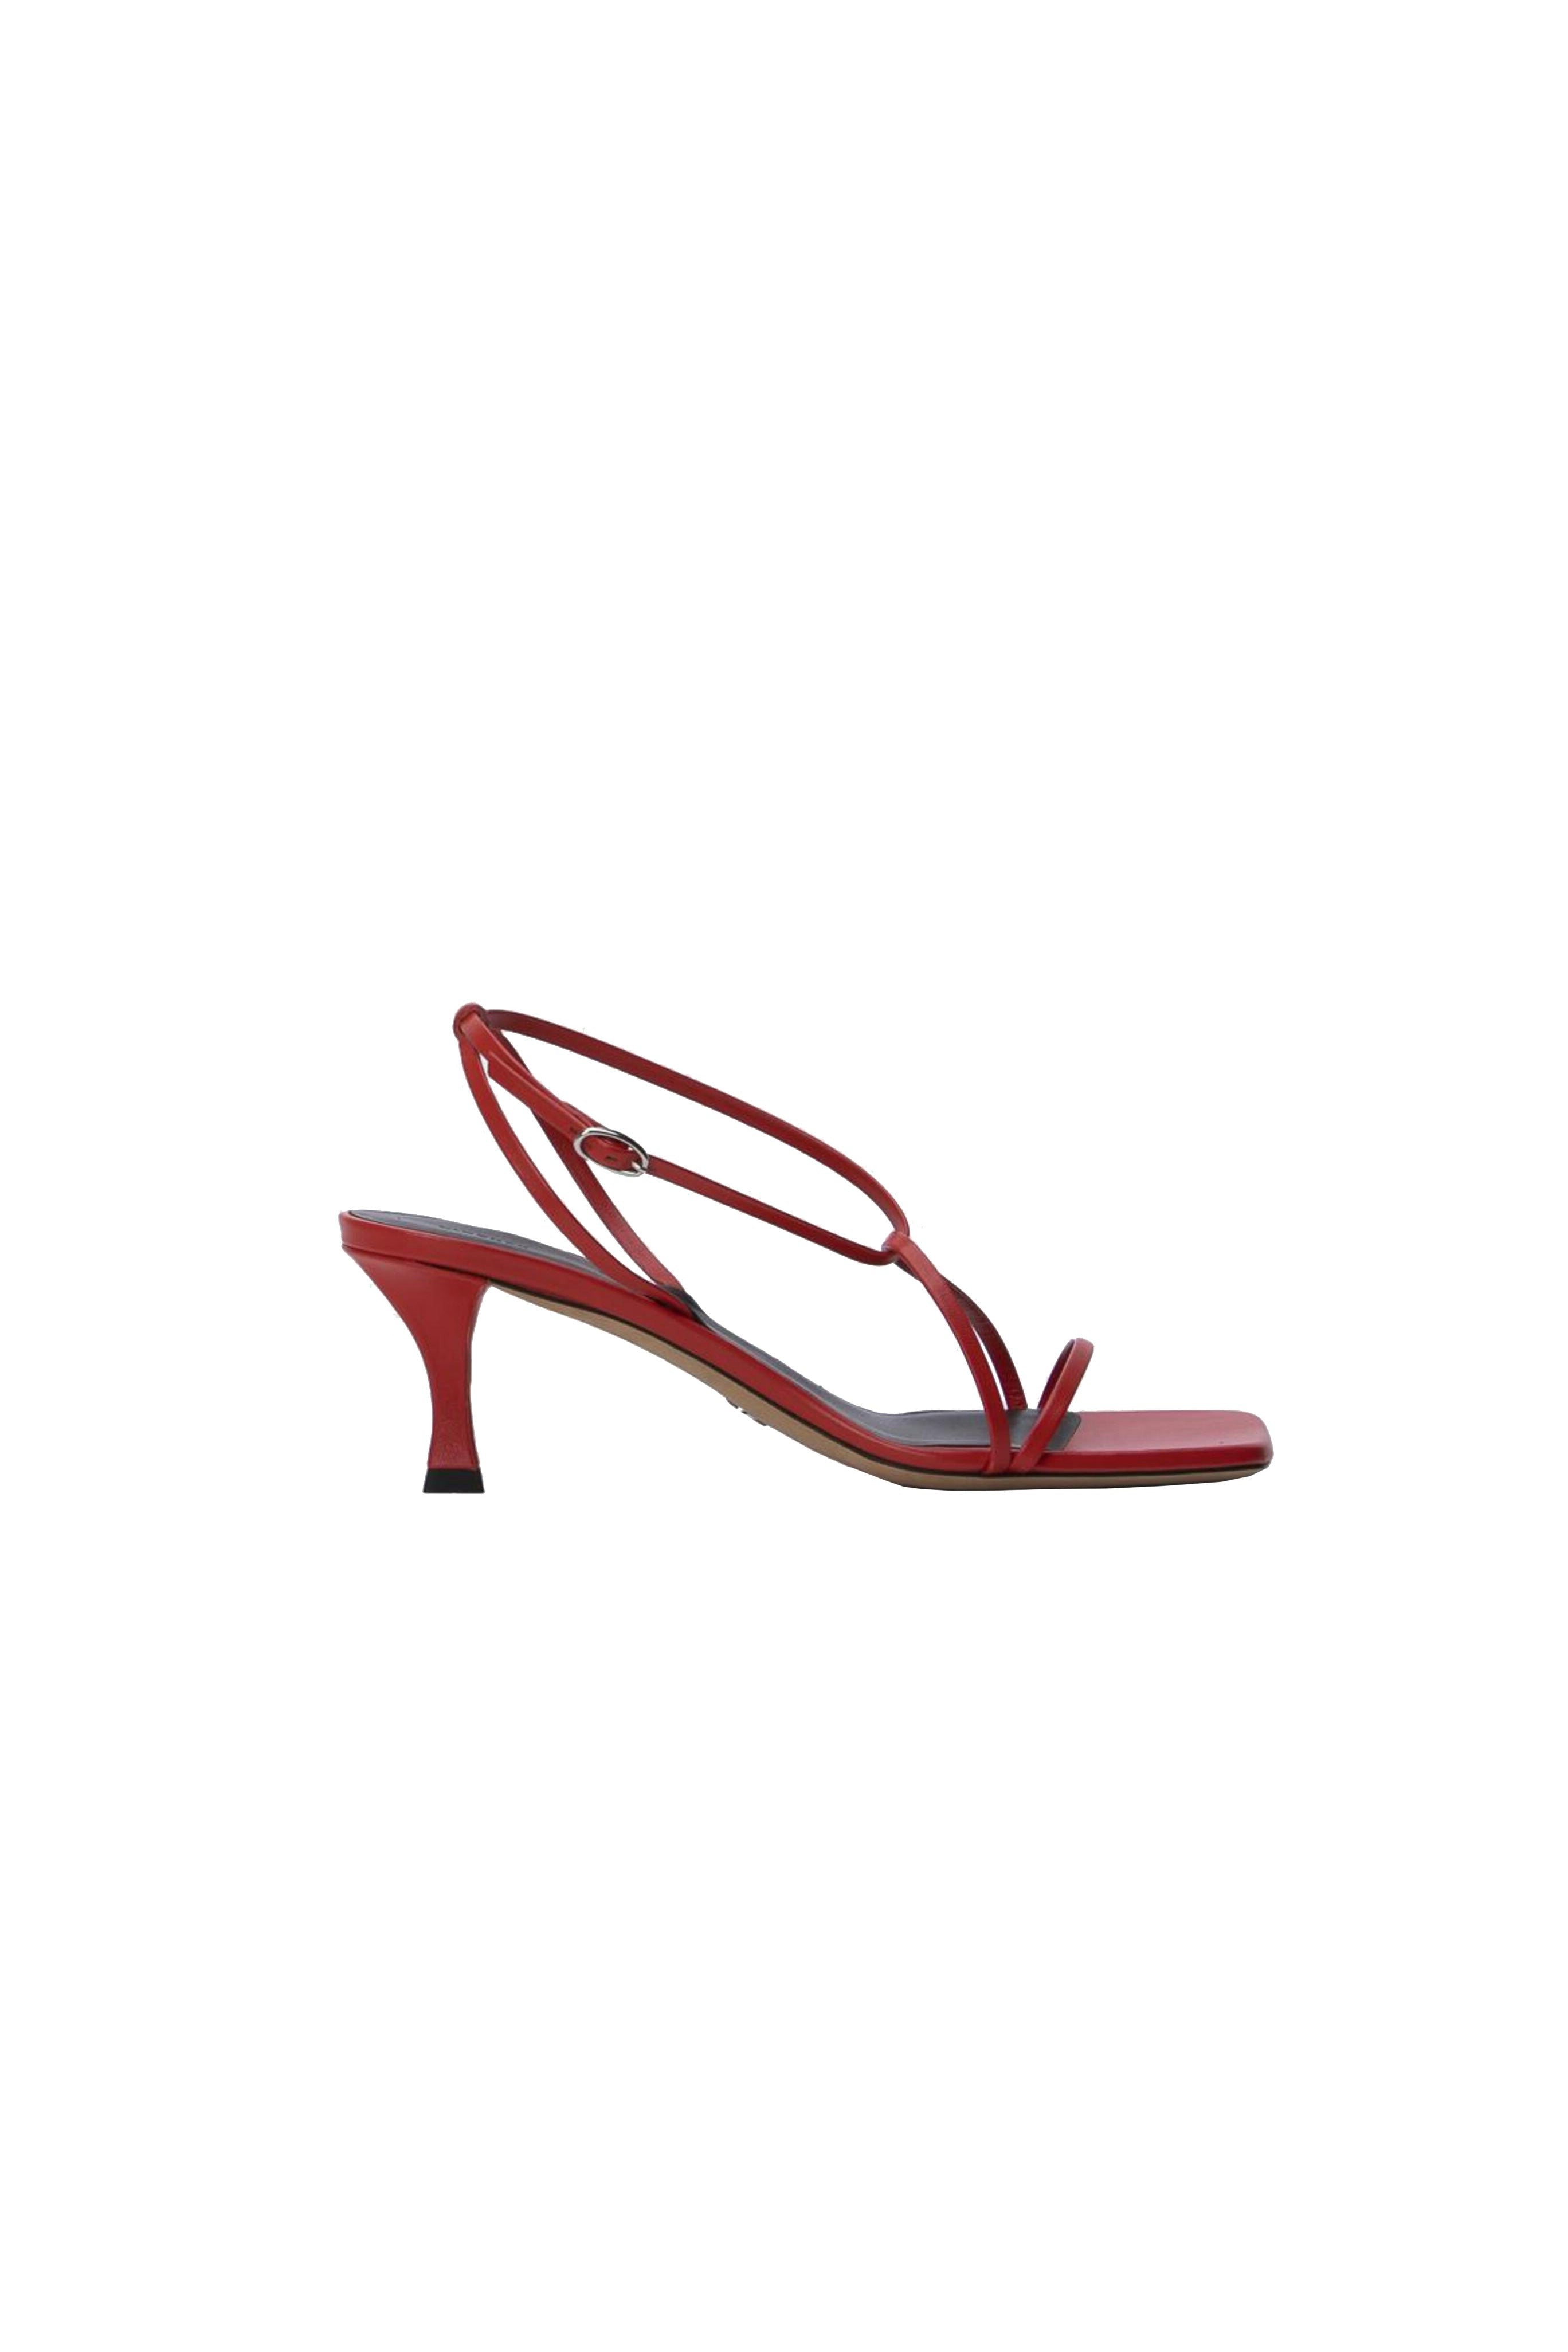 PROENZA SCHOULER Square Red Leather Strappy Sandals